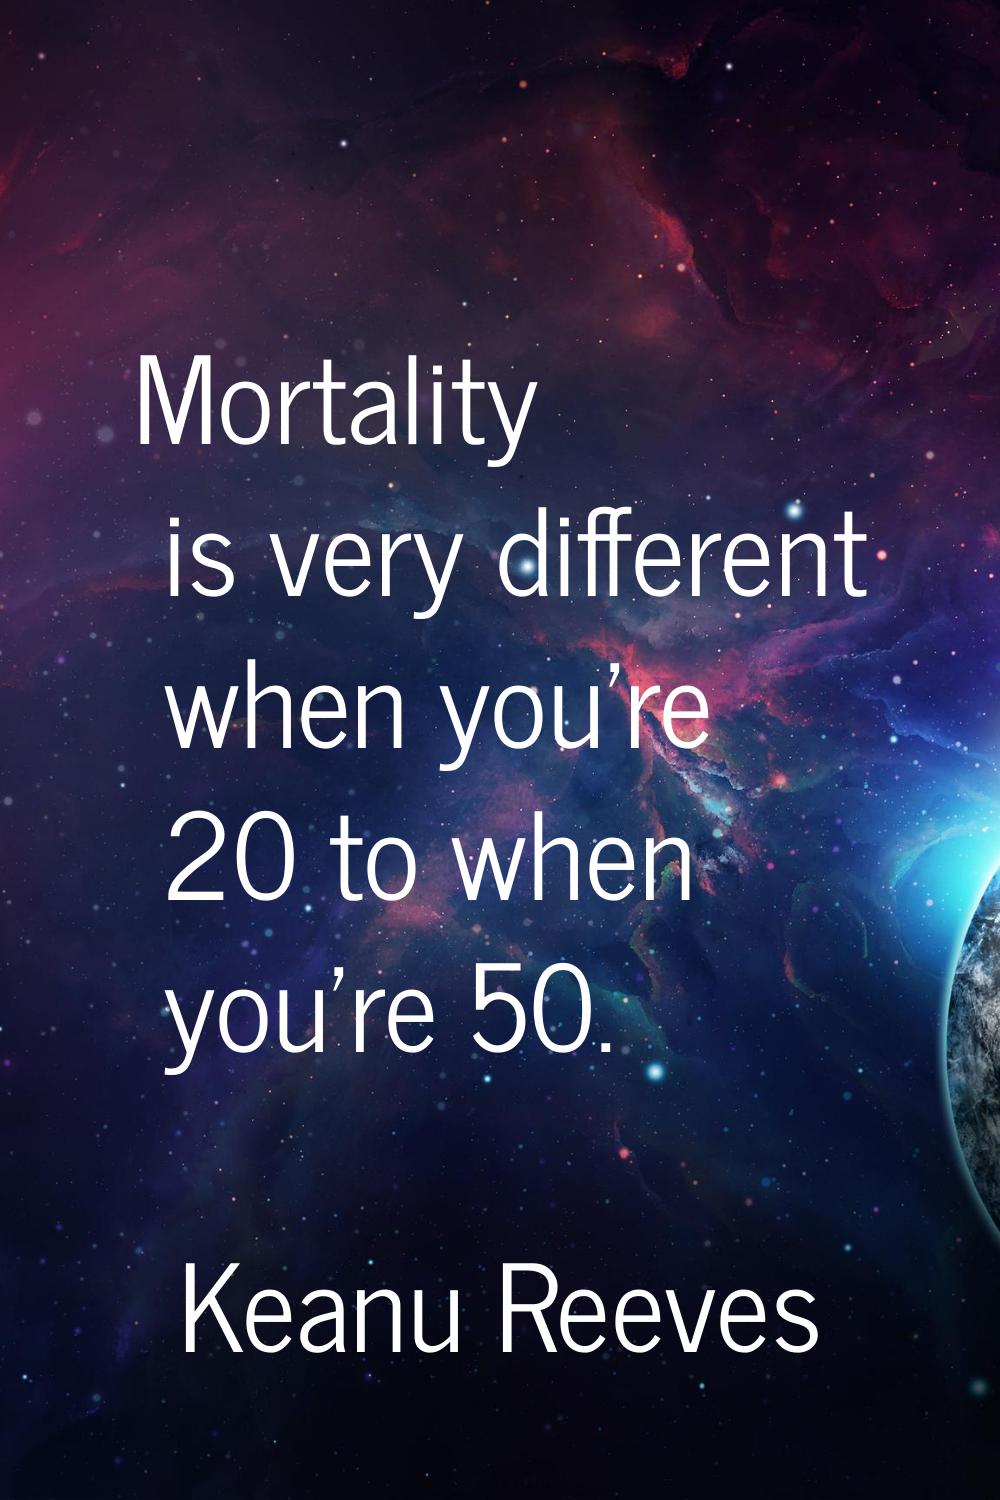 Mortality is very different when you're 20 to when you're 50.